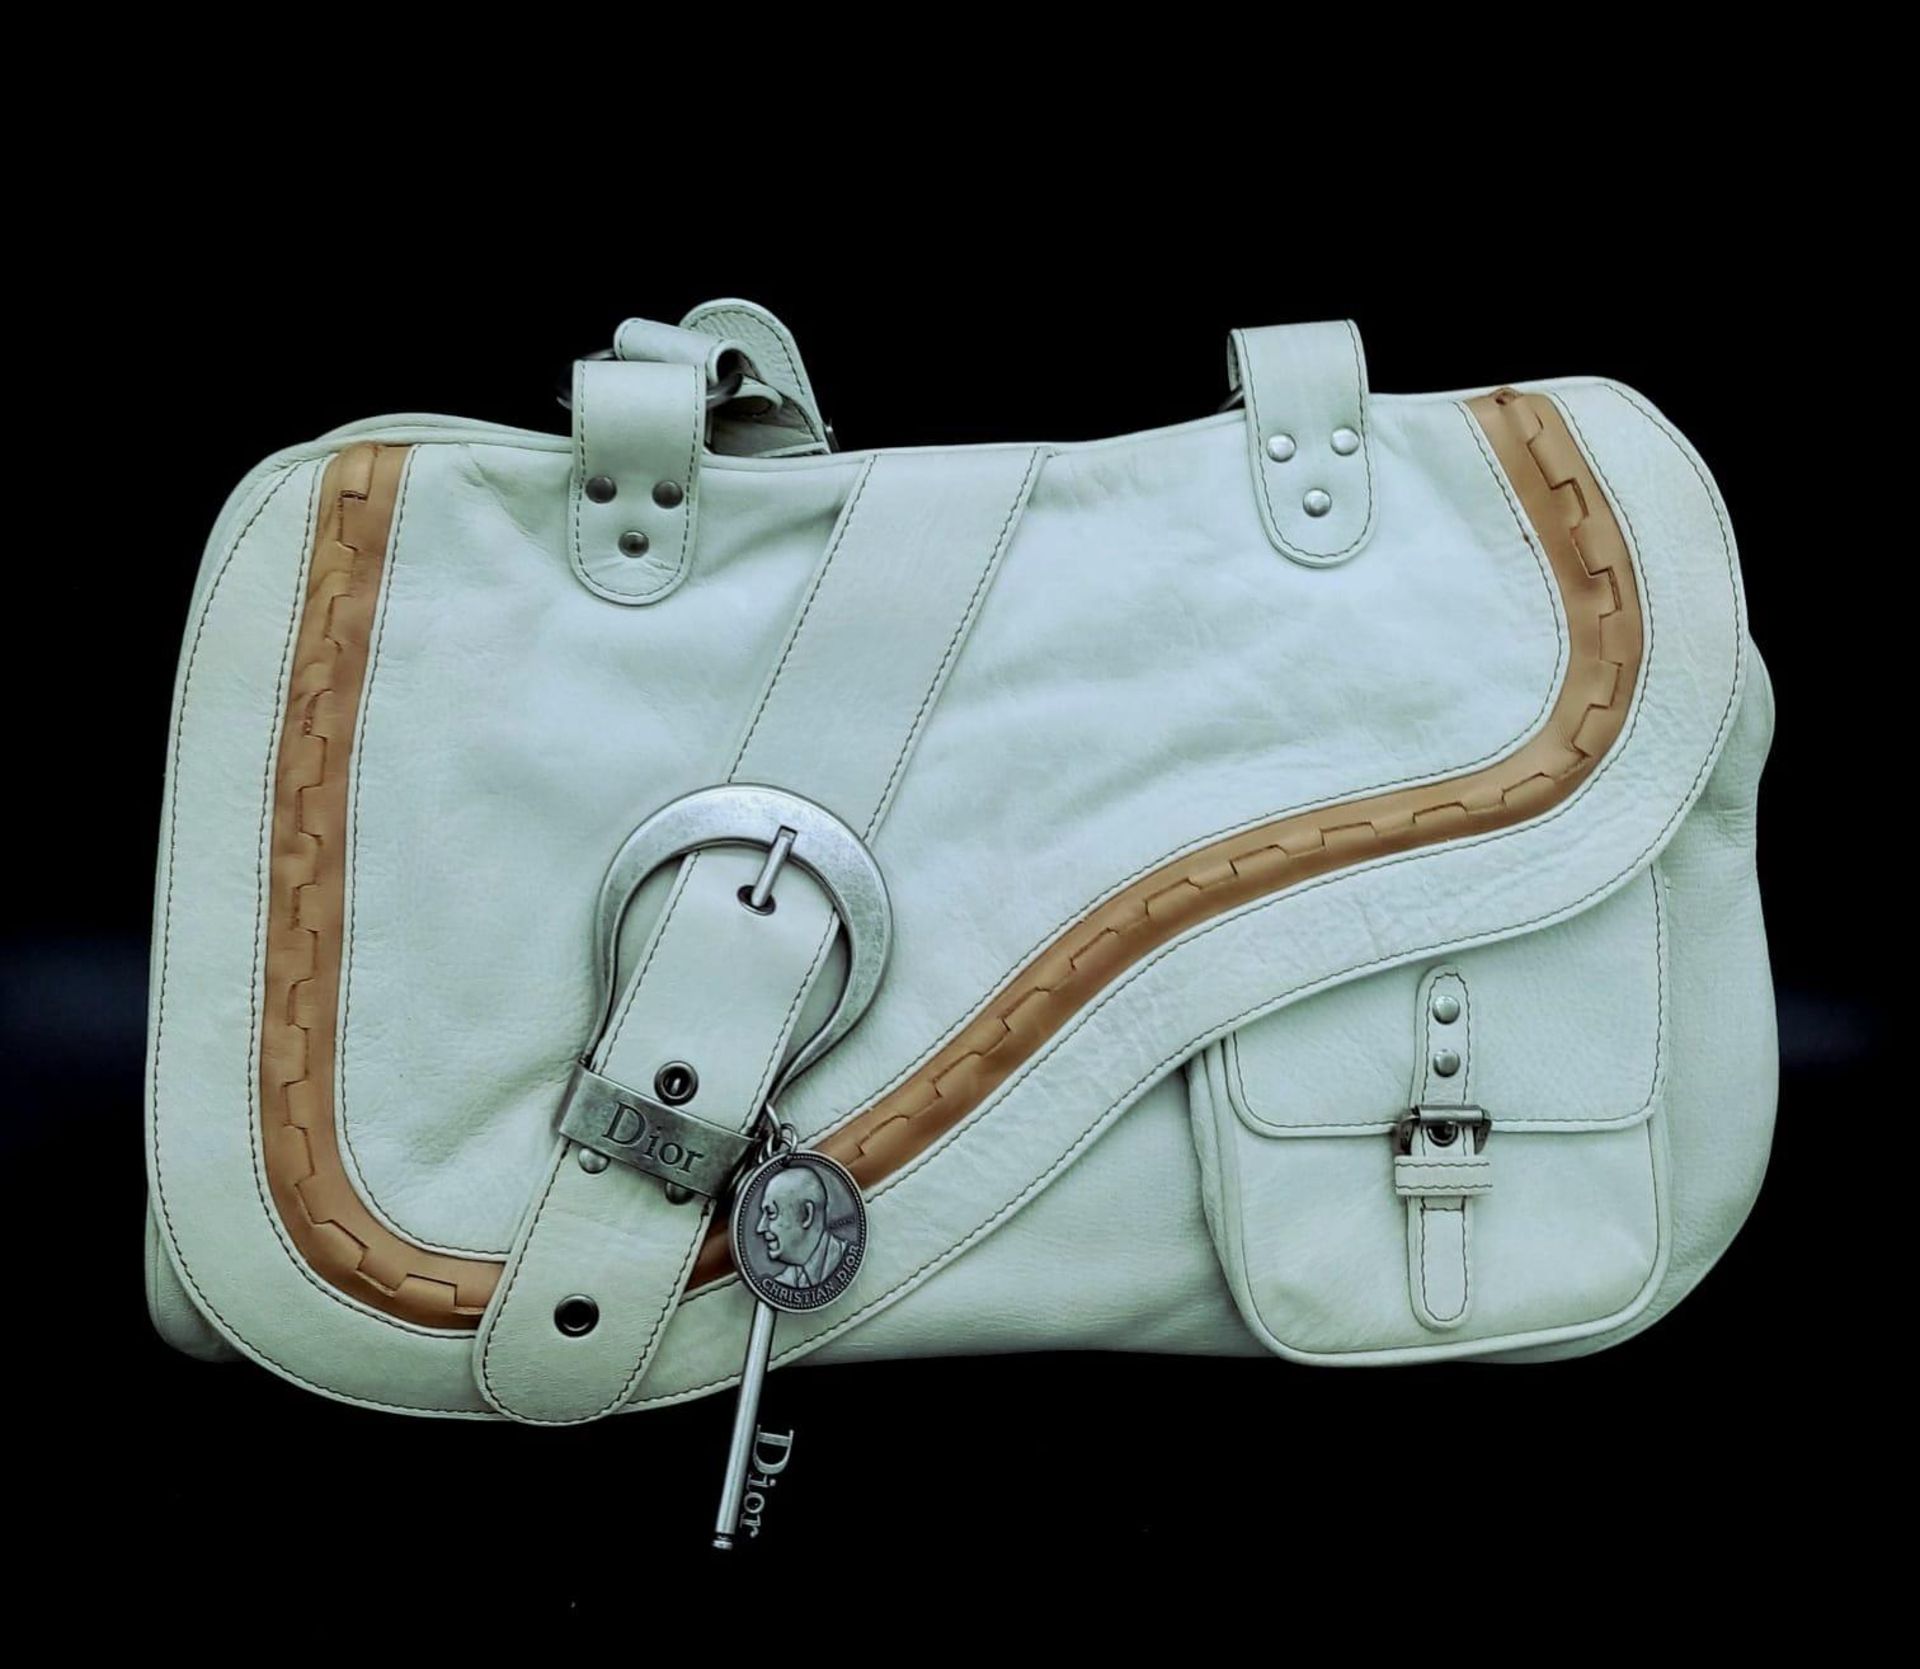 A Dior Gaucho Saddle Bag, Off-White Calf's Leather With Lamb Skin Boarders, Contrast Stitching - Image 2 of 7